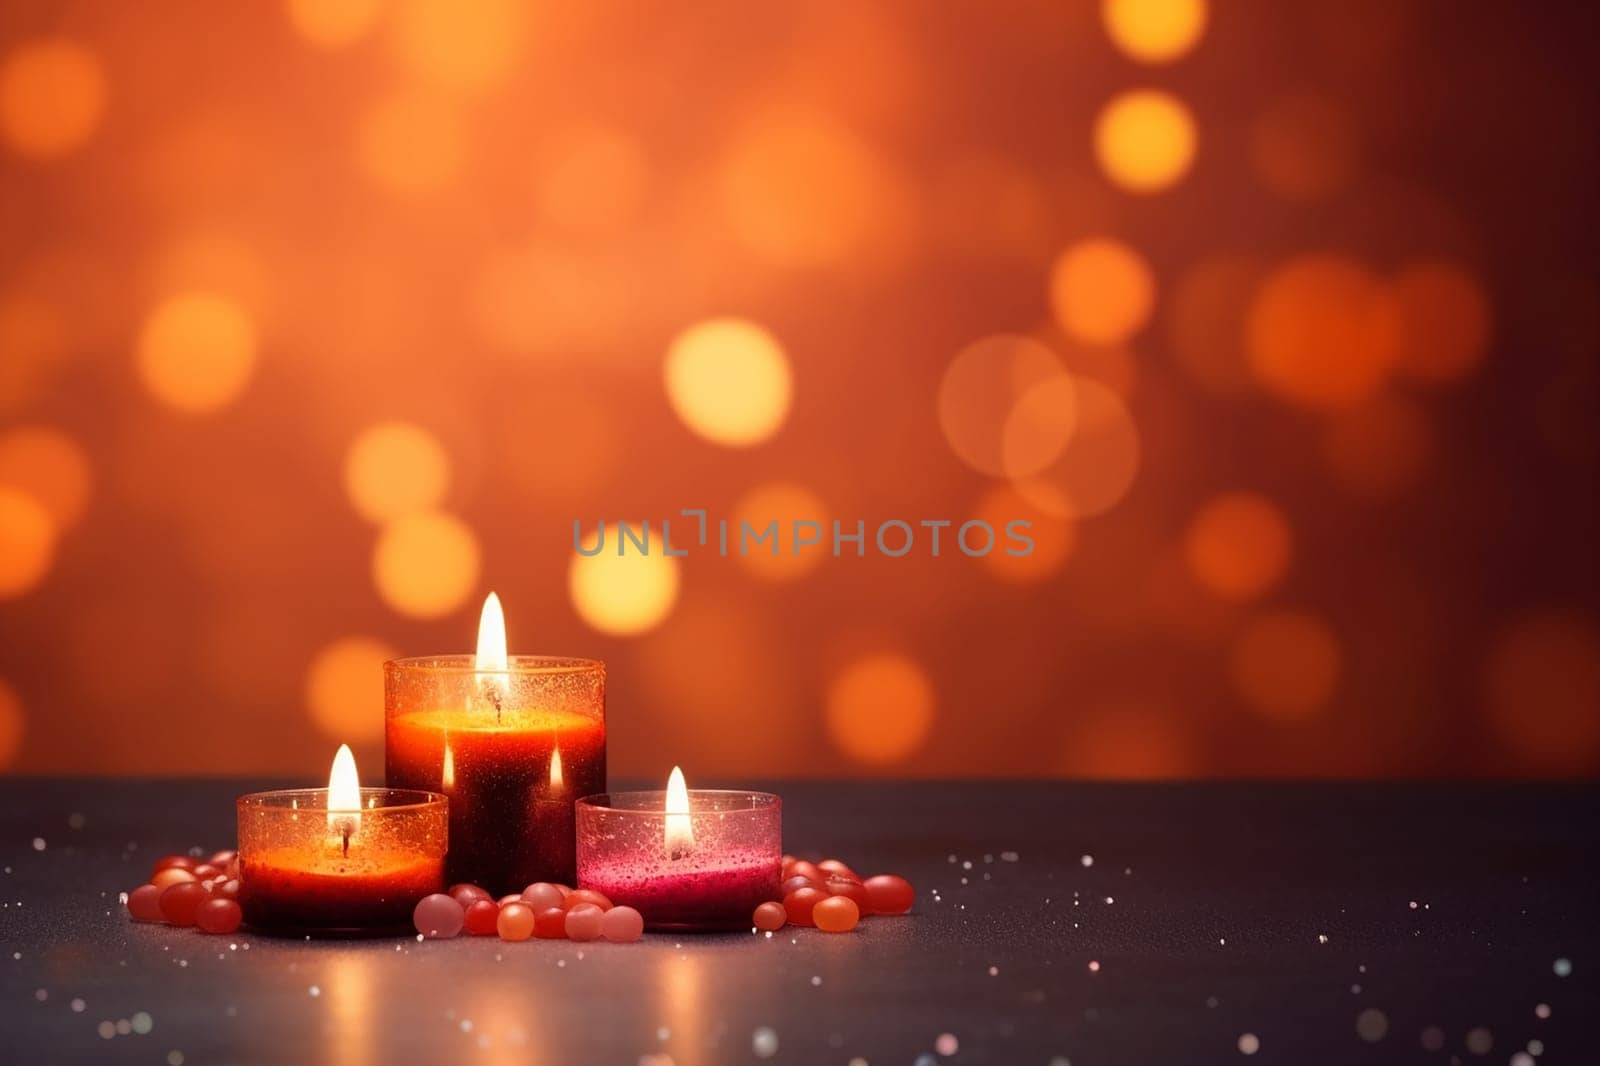 Three lit candles with a warm glow amidst bokeh lights and red beads on dark surface.